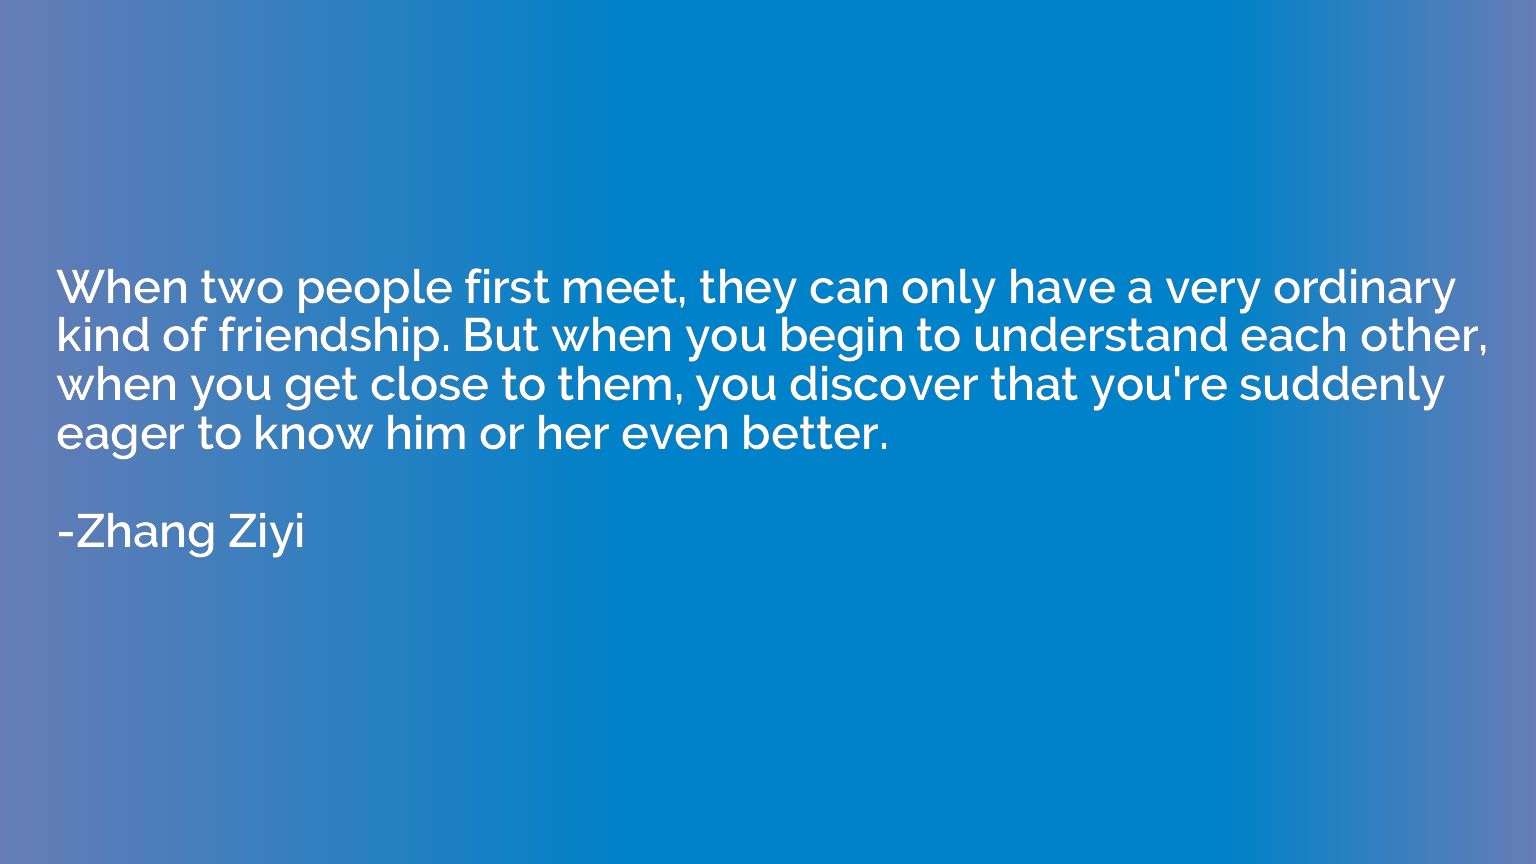 When two people first meet, they can only have a very ordina